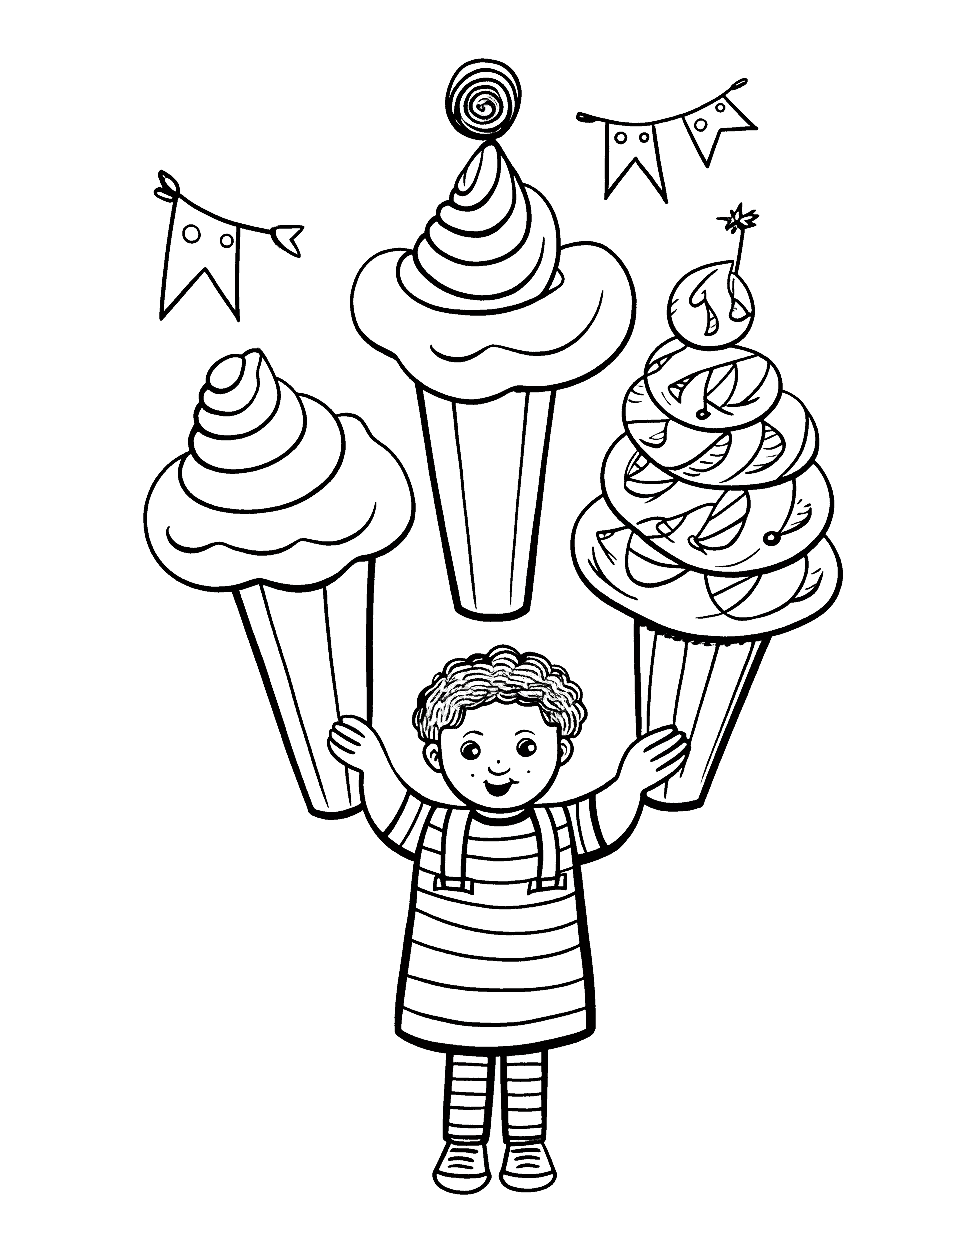 Circus Ice Cream Coloring Page - A circus scene with juggling ice cream